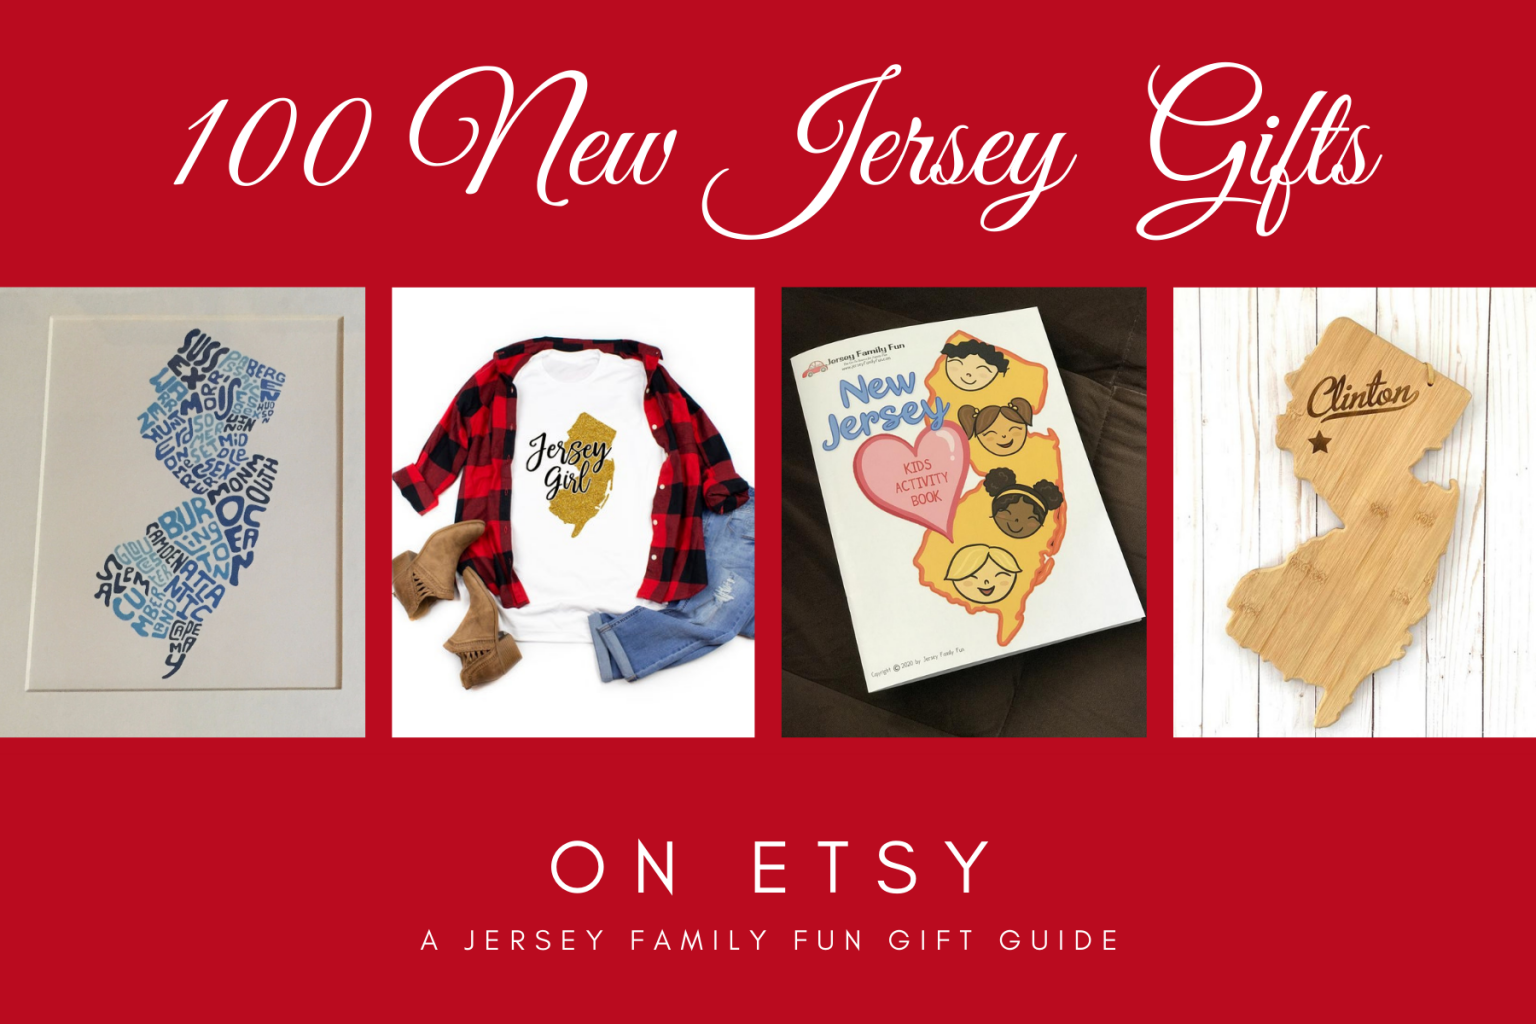 The 100 Best New Jersey Gifts on Etsy ~ Jersey Family Fun